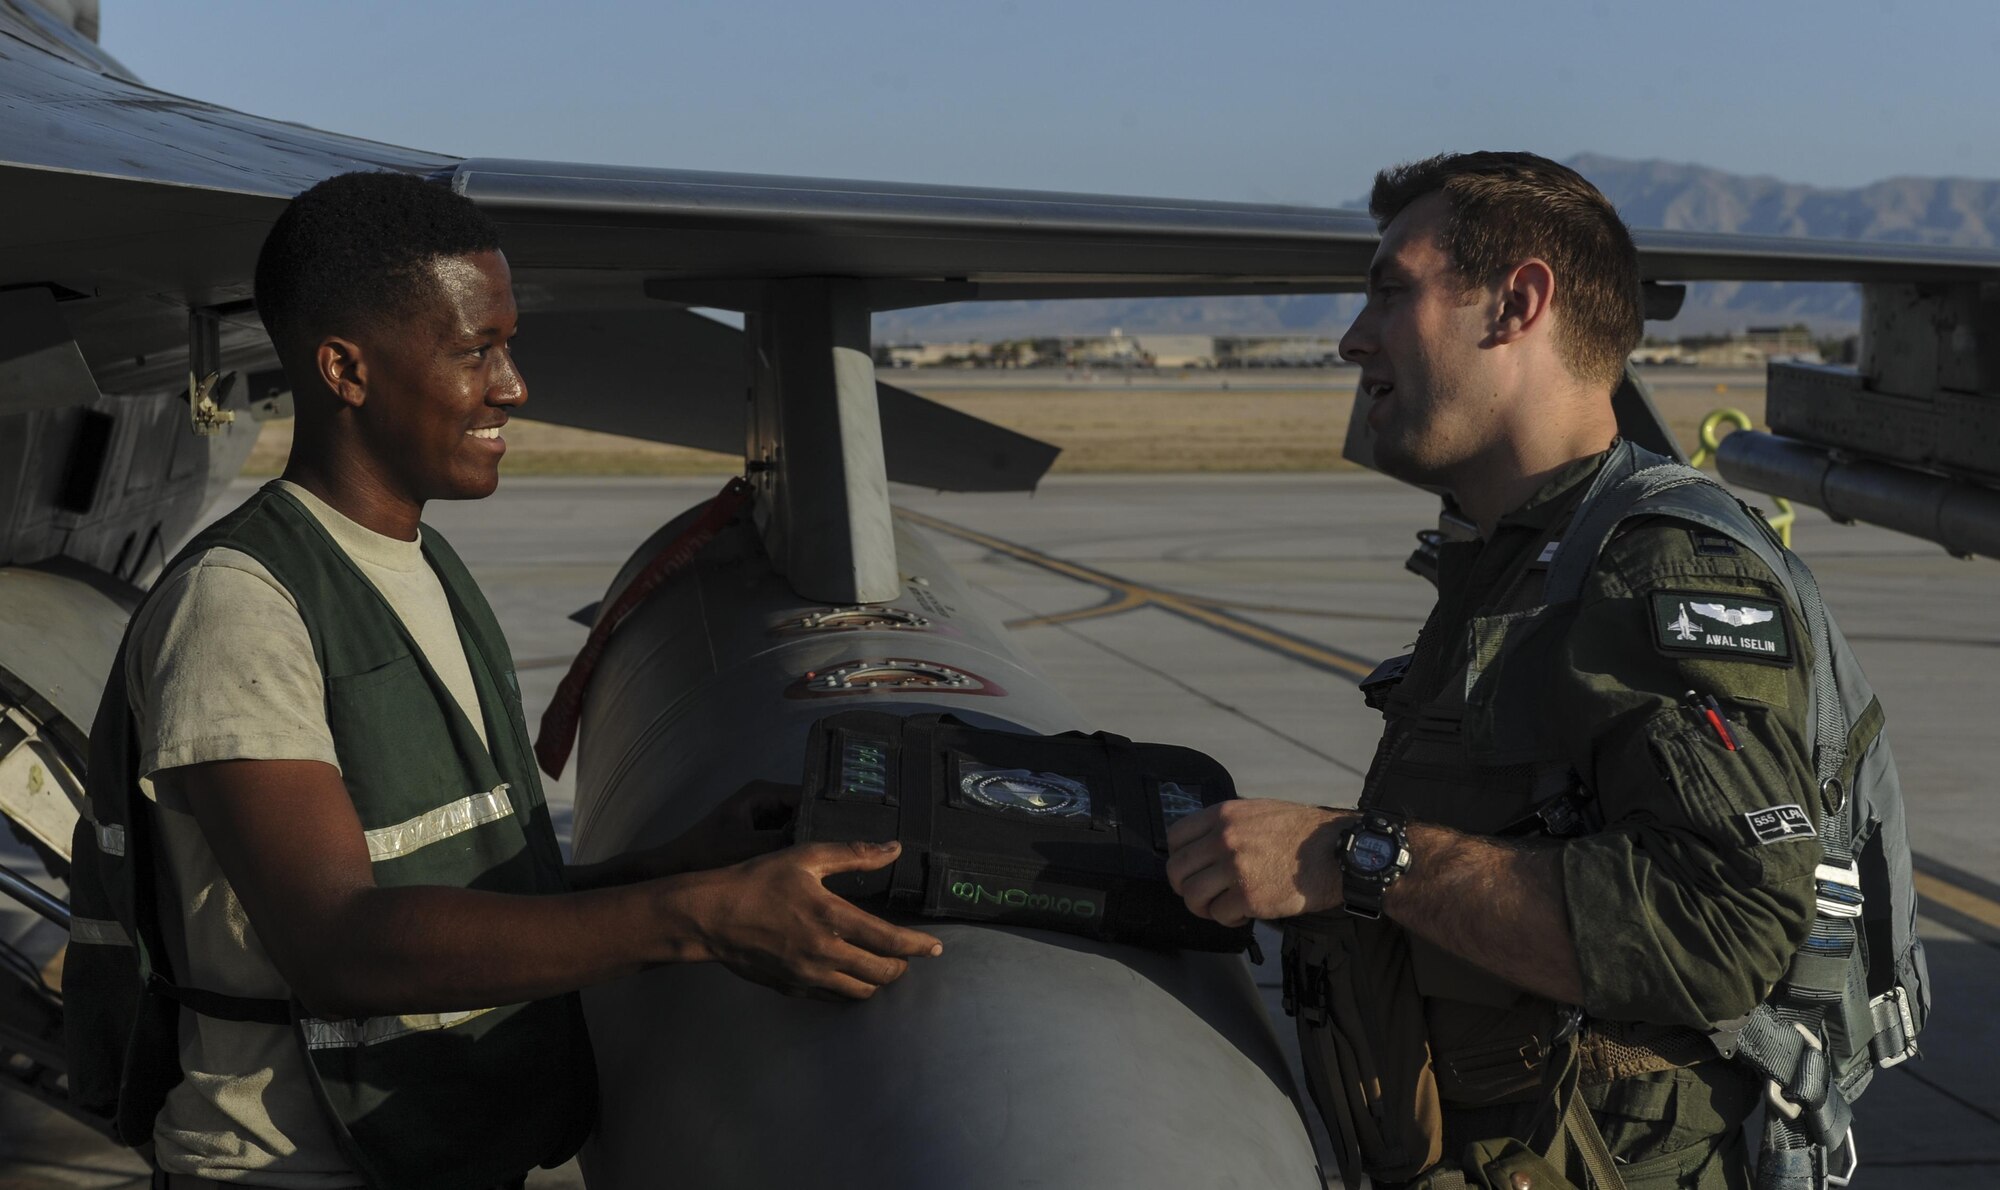 Senior Airman Dominique Patton, 555th Fighter Squadron, Aviano Air Force Base, Italy, crew chief, and Capt Awal Iselin, 555th FS pilot, review a pre-flight binder before take-off at Nellis Air Force Base, Nev., August 2, 2016. The 555th FS is participating with other branches and allies in a large scale air-to-ground excercise at Fort Irwin, Ca. known as Green Flag 16-8. (United States Air Force photo by Airman 1st Class Kevin Tanenbaum/Released)